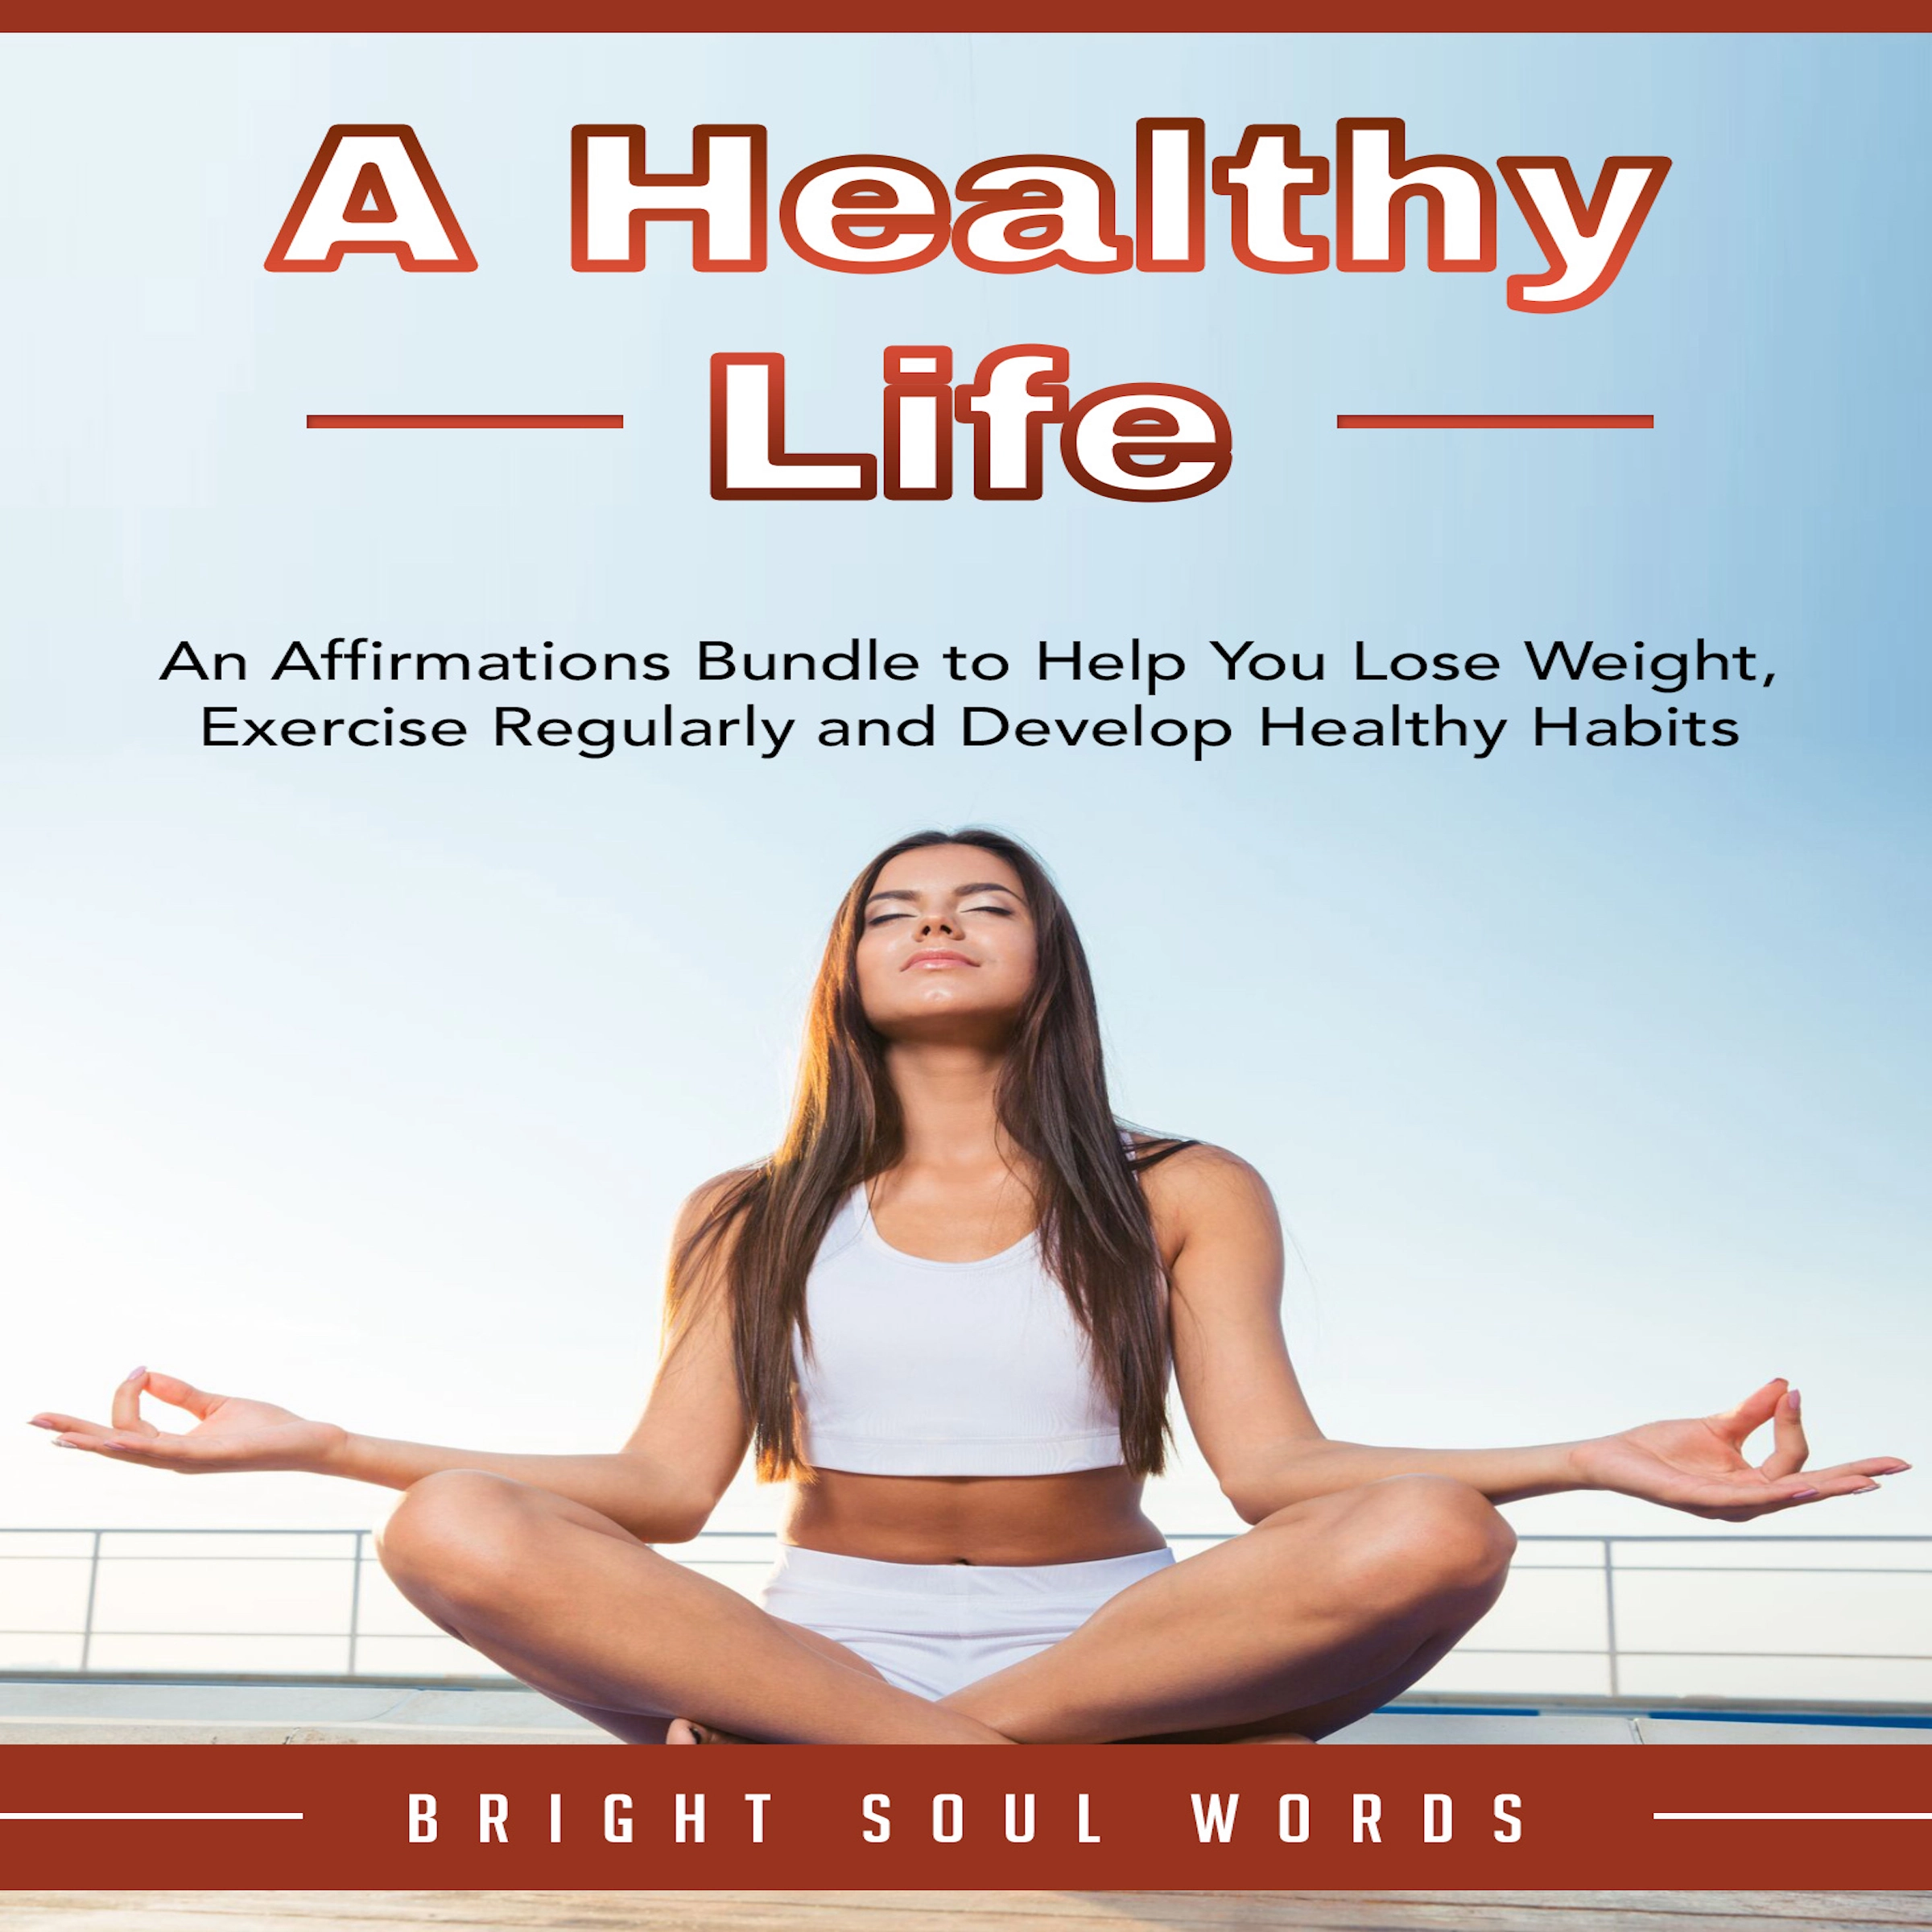 A Healthy Life: An Affirmations Bundle to Help You Lose Weight, Exercise Regularly and Develop Healthy Habits Audiobook by Bright Soul Words